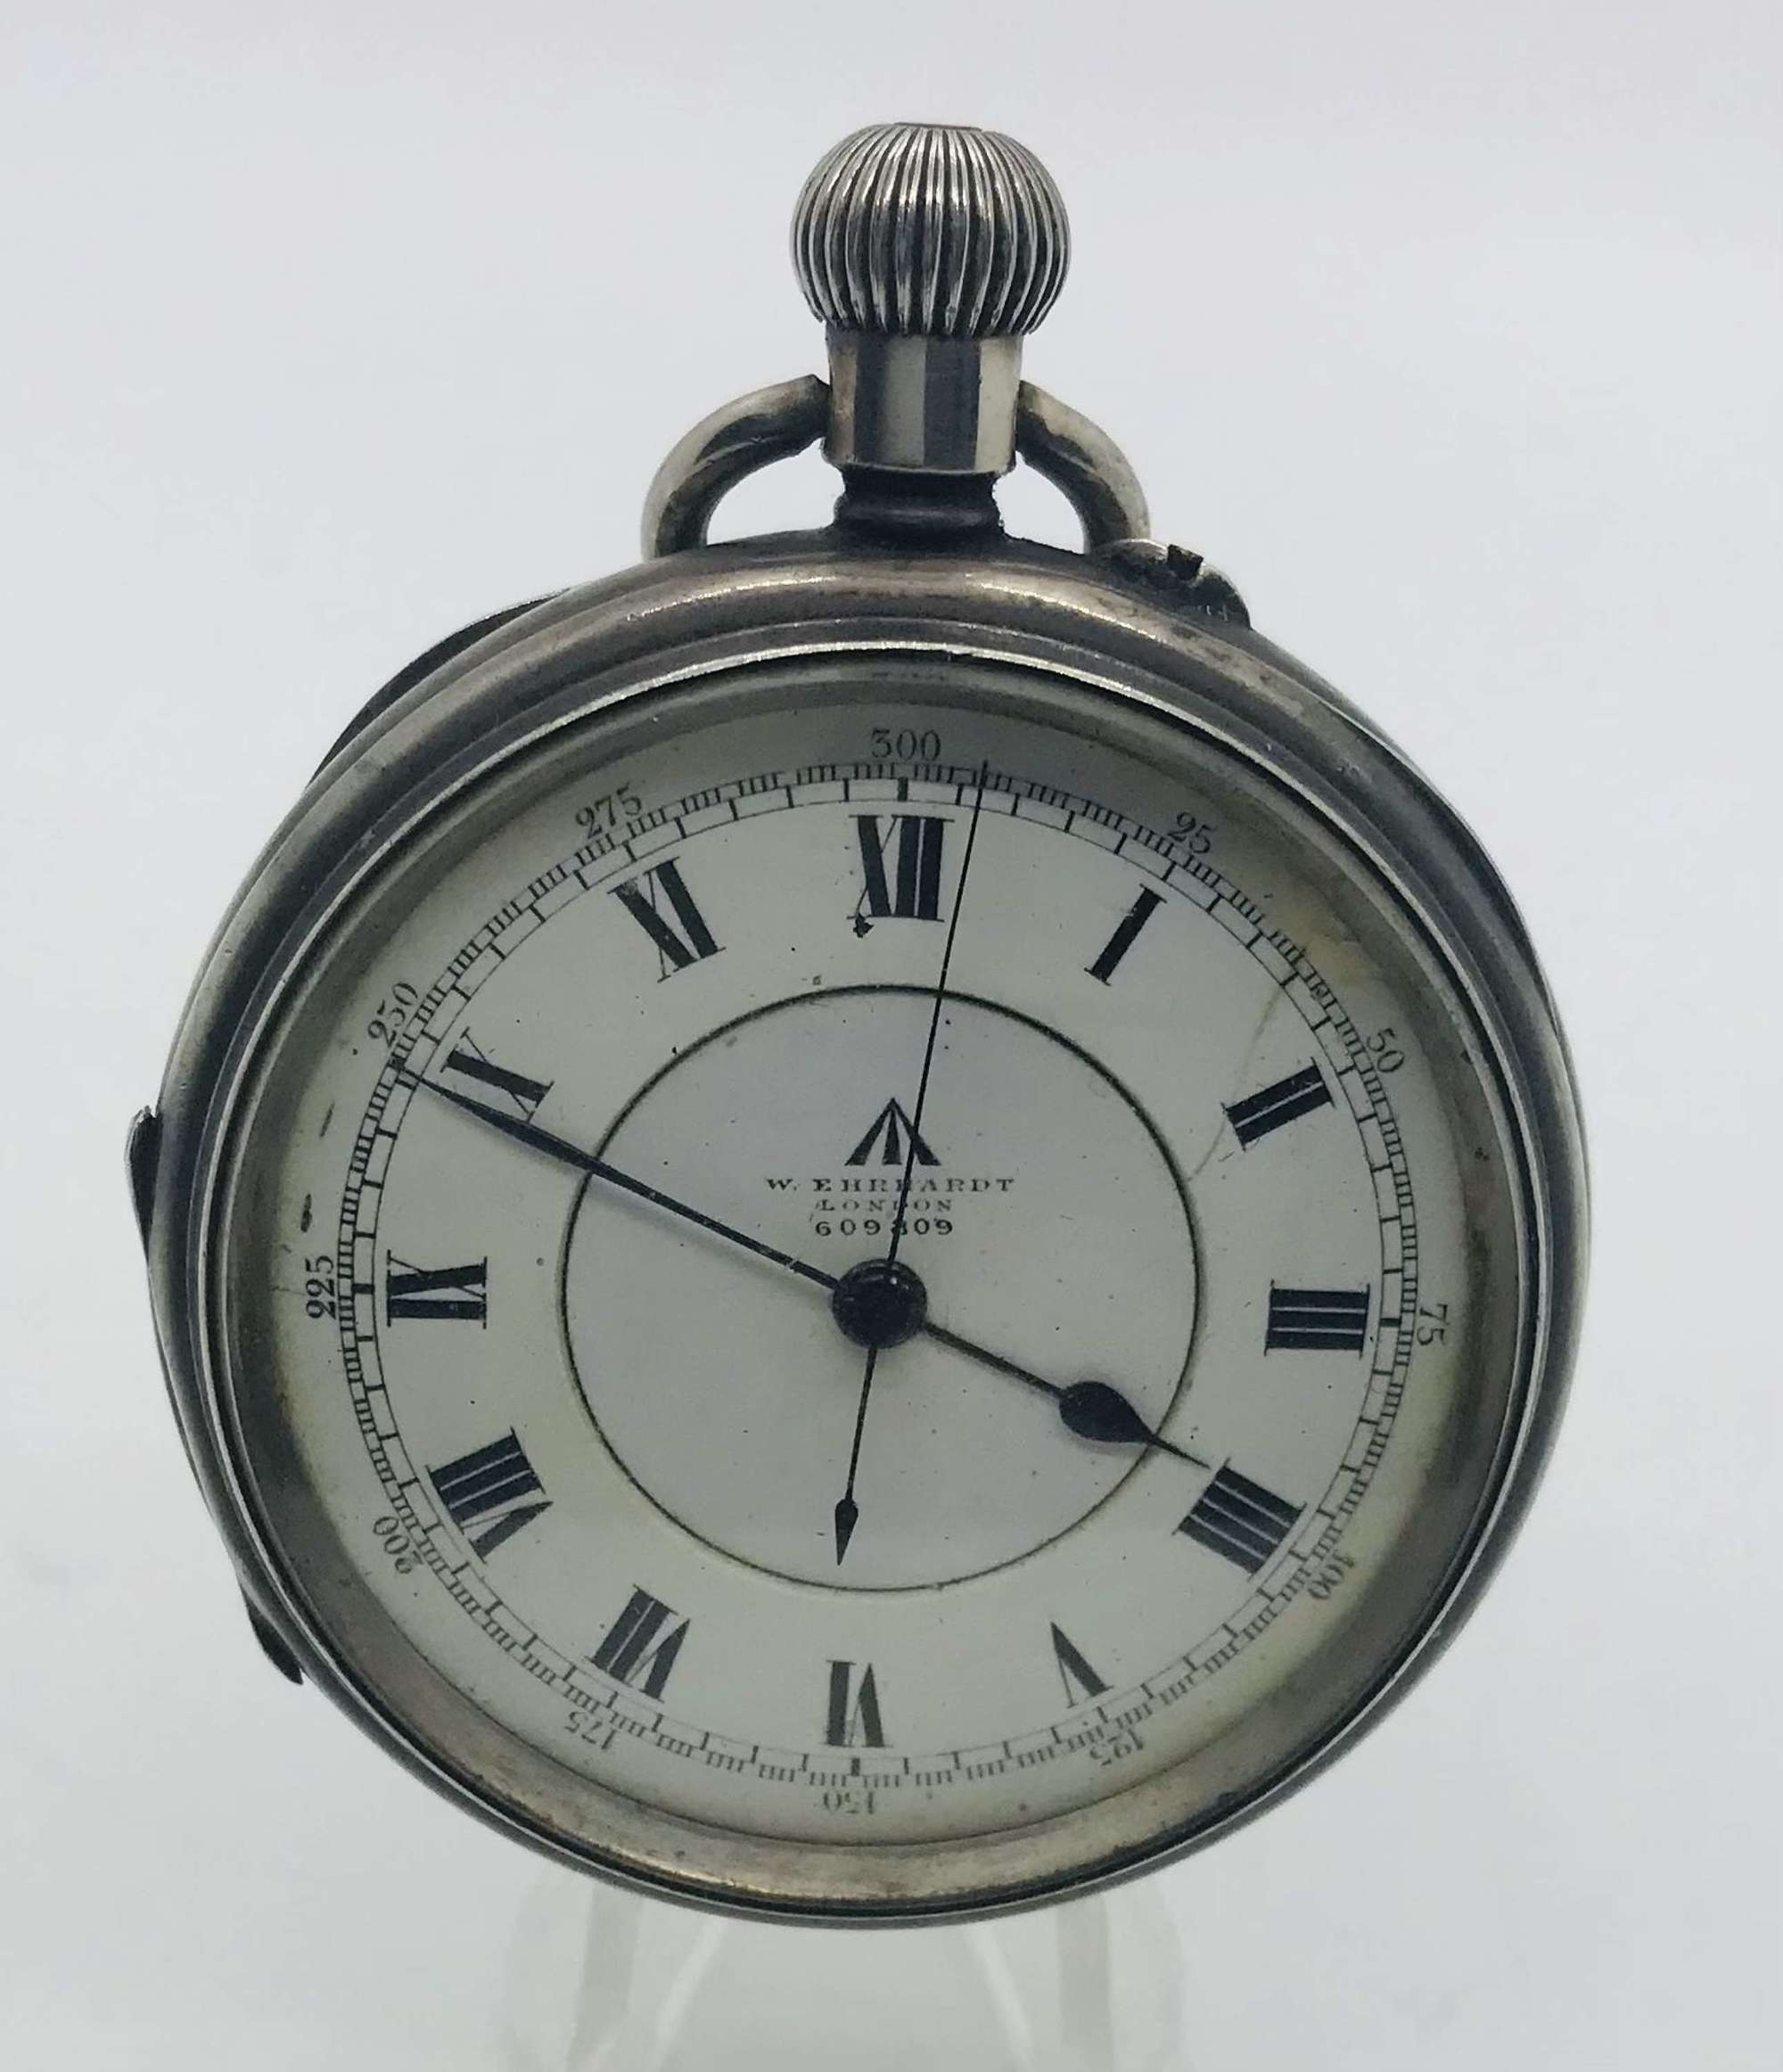 Royal Navy pocket watch made by W Ehrhardt 1913